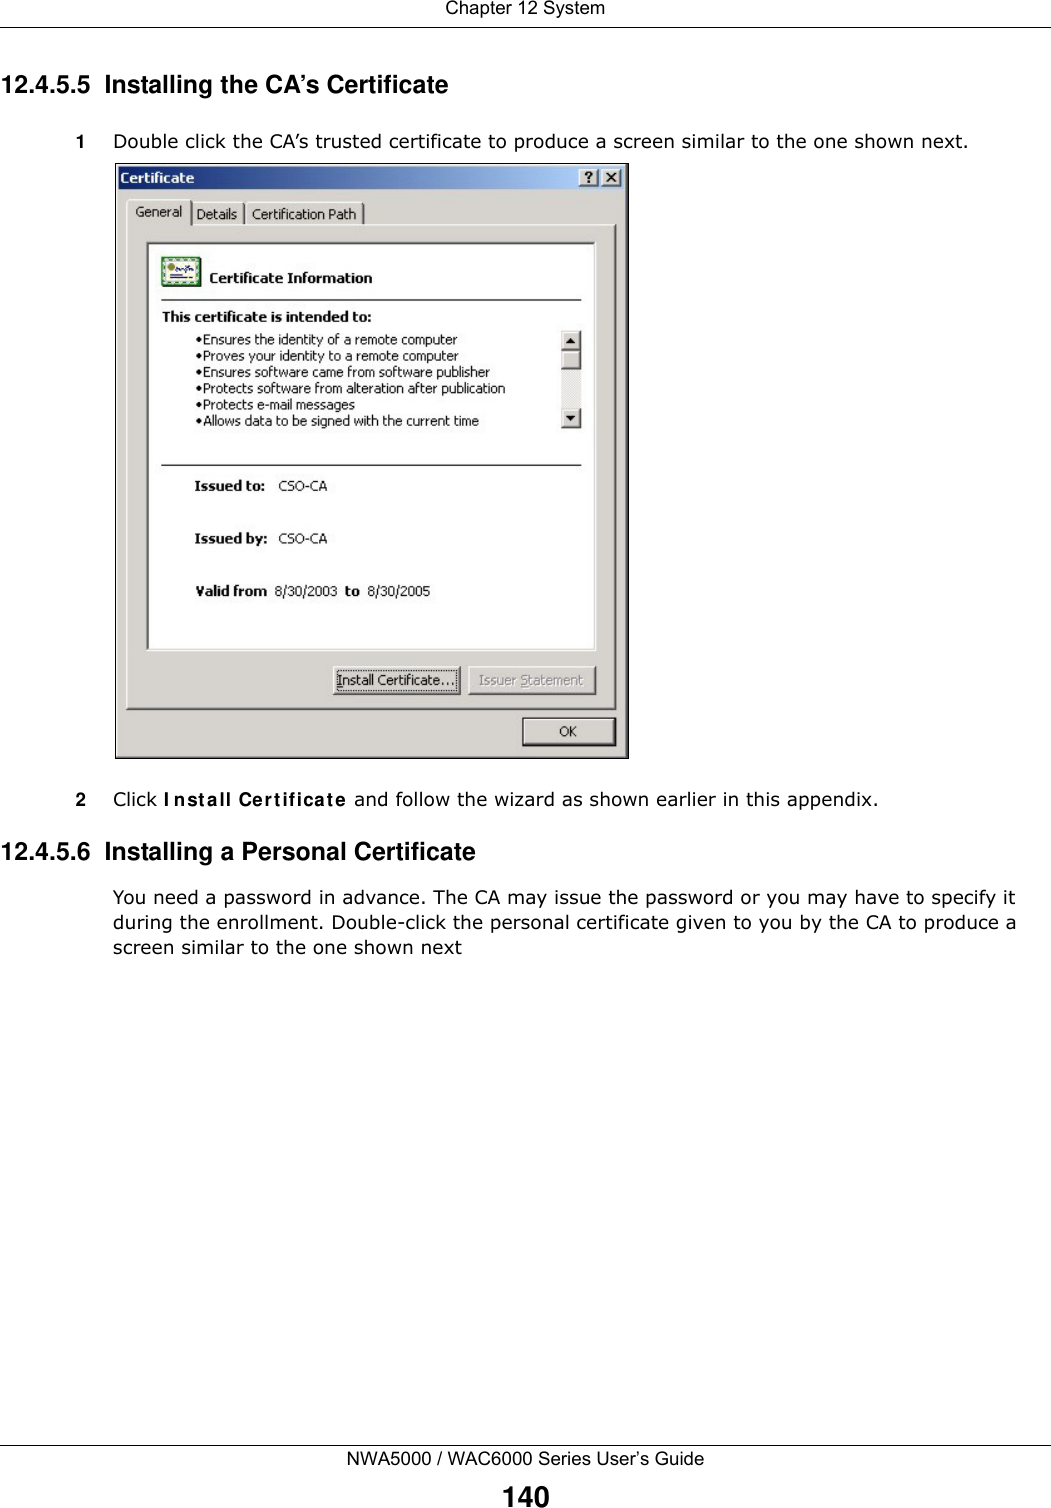 Chapter 12 SystemNWA5000 / WAC6000 Series User’s Guide14012.4.5.5  Installing the CA’s Certificate1Double click the CA’s trusted certificate to produce a screen similar to the one shown next.2Click Install Certificate and follow the wizard as shown earlier in this appendix.12.4.5.6  Installing a Personal CertificateYou need a password in advance. The CA may issue the password or you may have to specify it during the enrollment. Double-click the personal certificate given to you by the CA to produce a screen similar to the one shown next